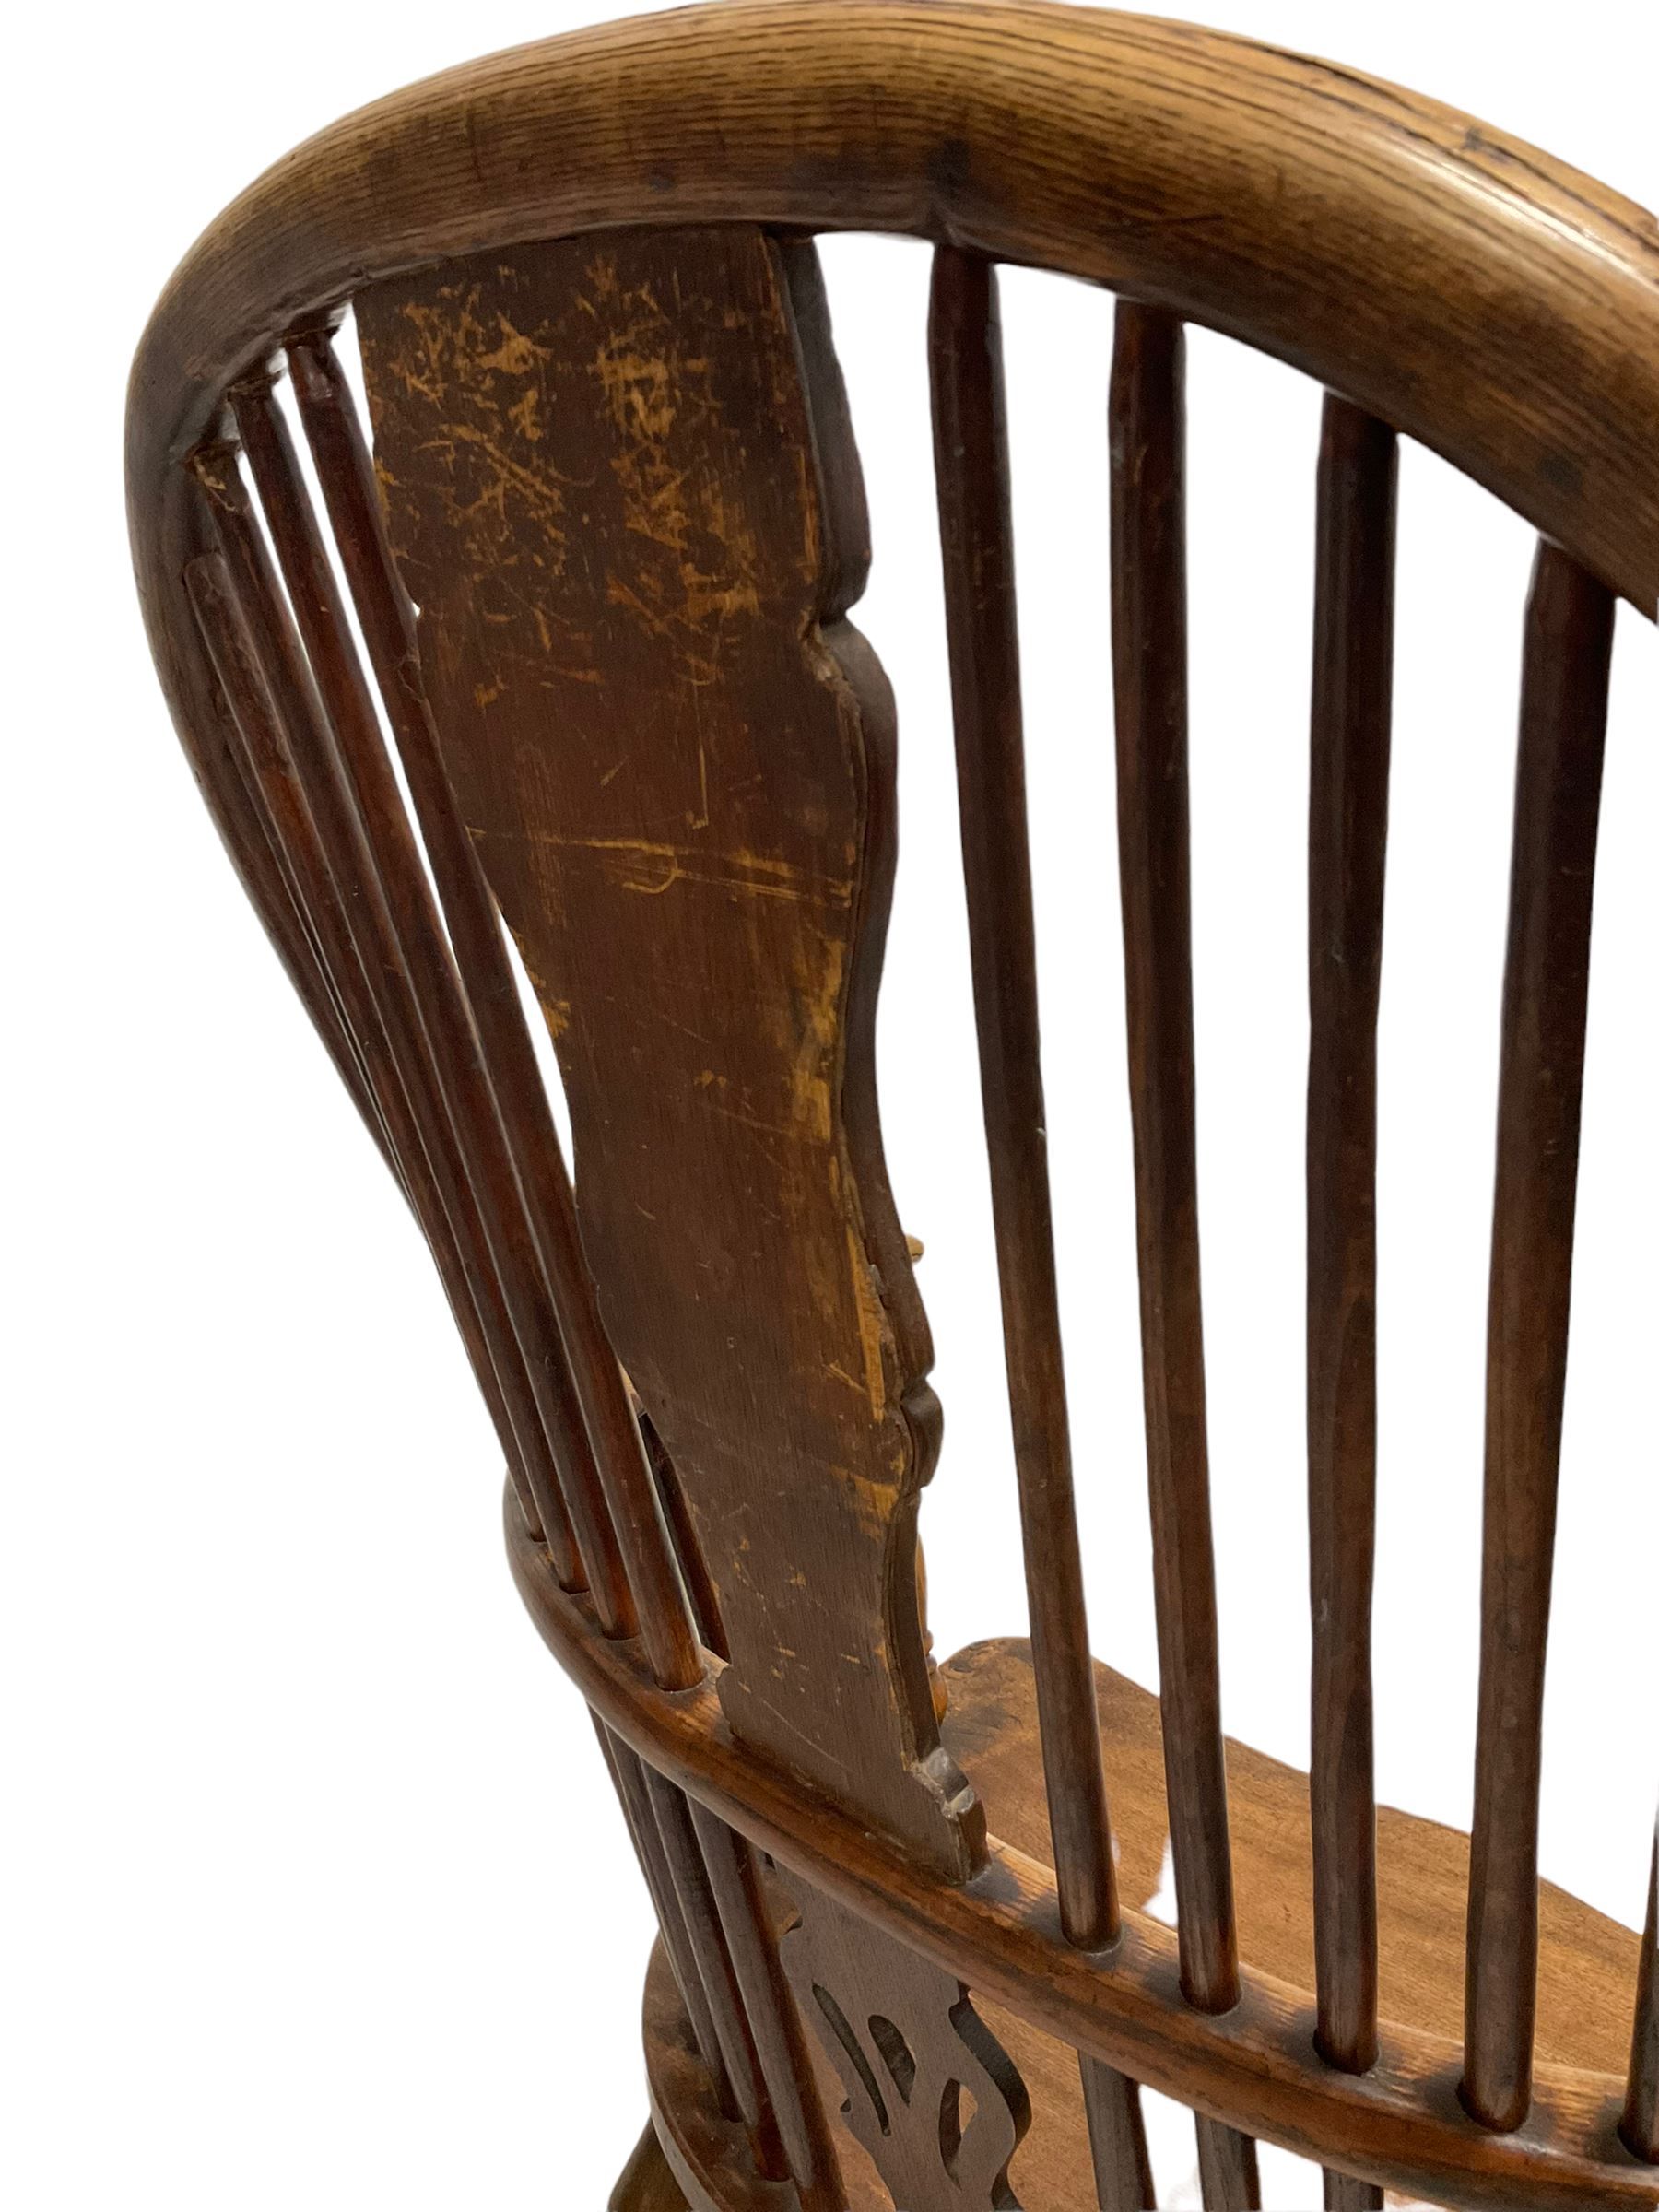 Early 19th century Windsor armchair - Image 4 of 5